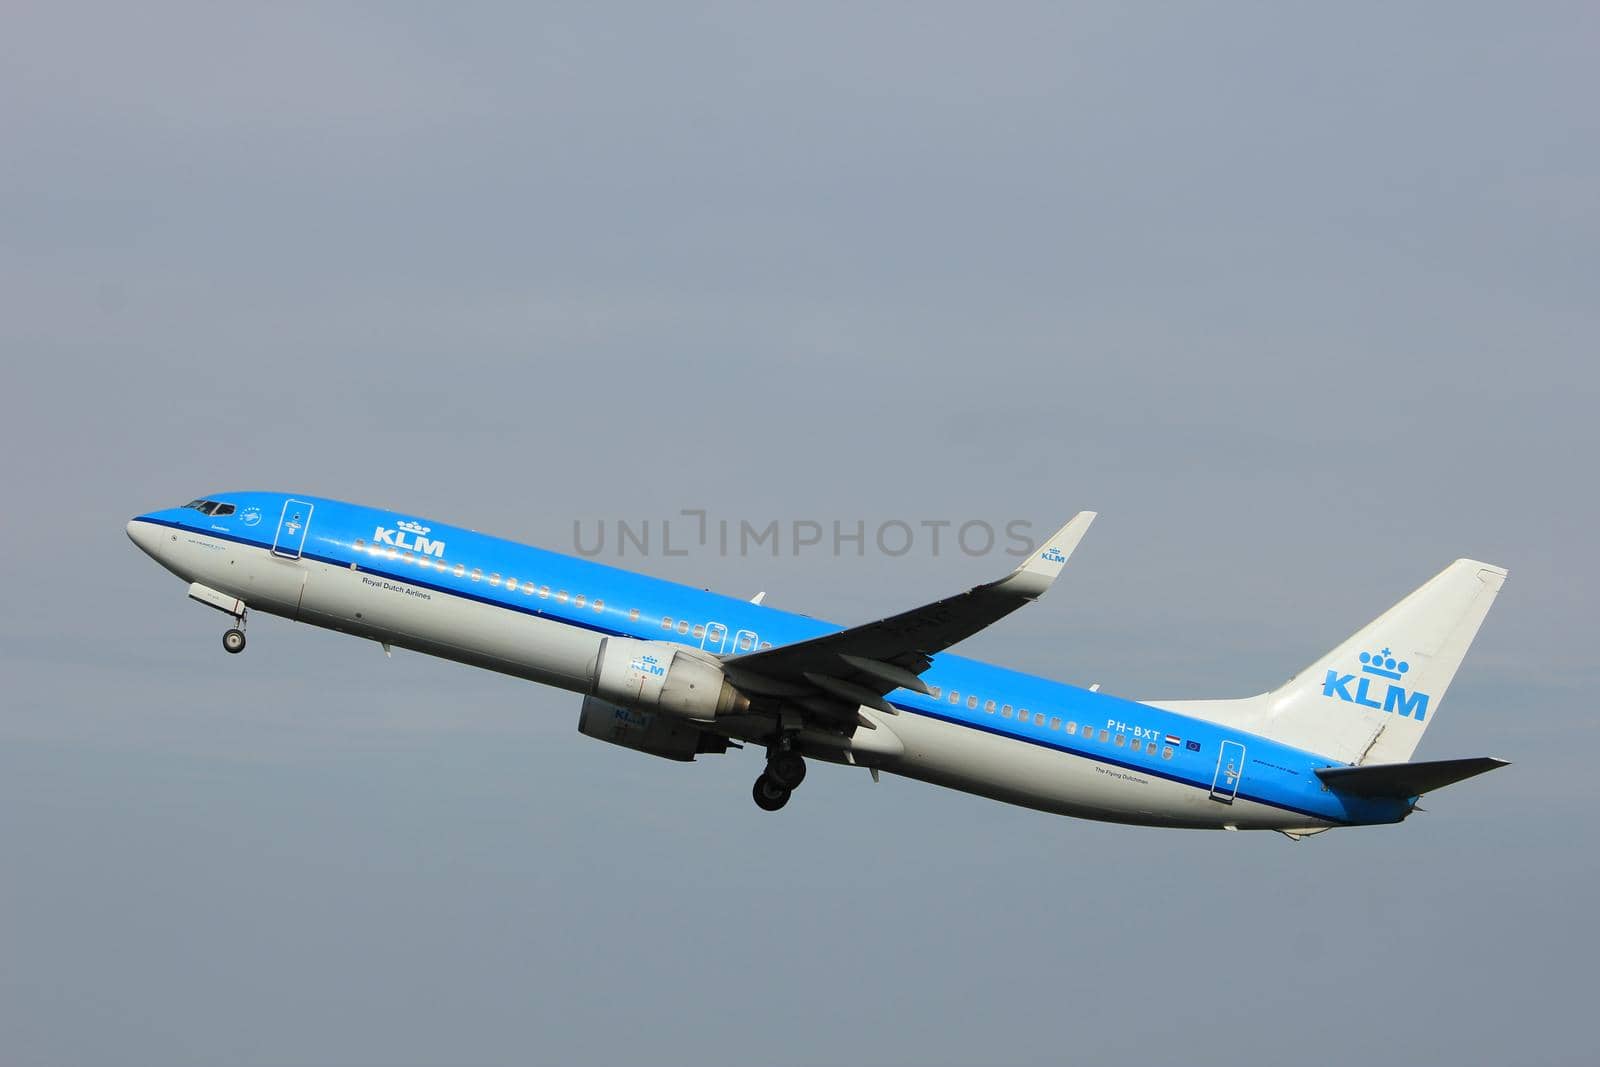 Amsterdam, the Netherlands  -  June 2nd, 2017: PH-BXT KLM Royal Dutch Airlines Boeing 737-900 taking off from Polderbaan Runway Amsterdam Airport Schiphol